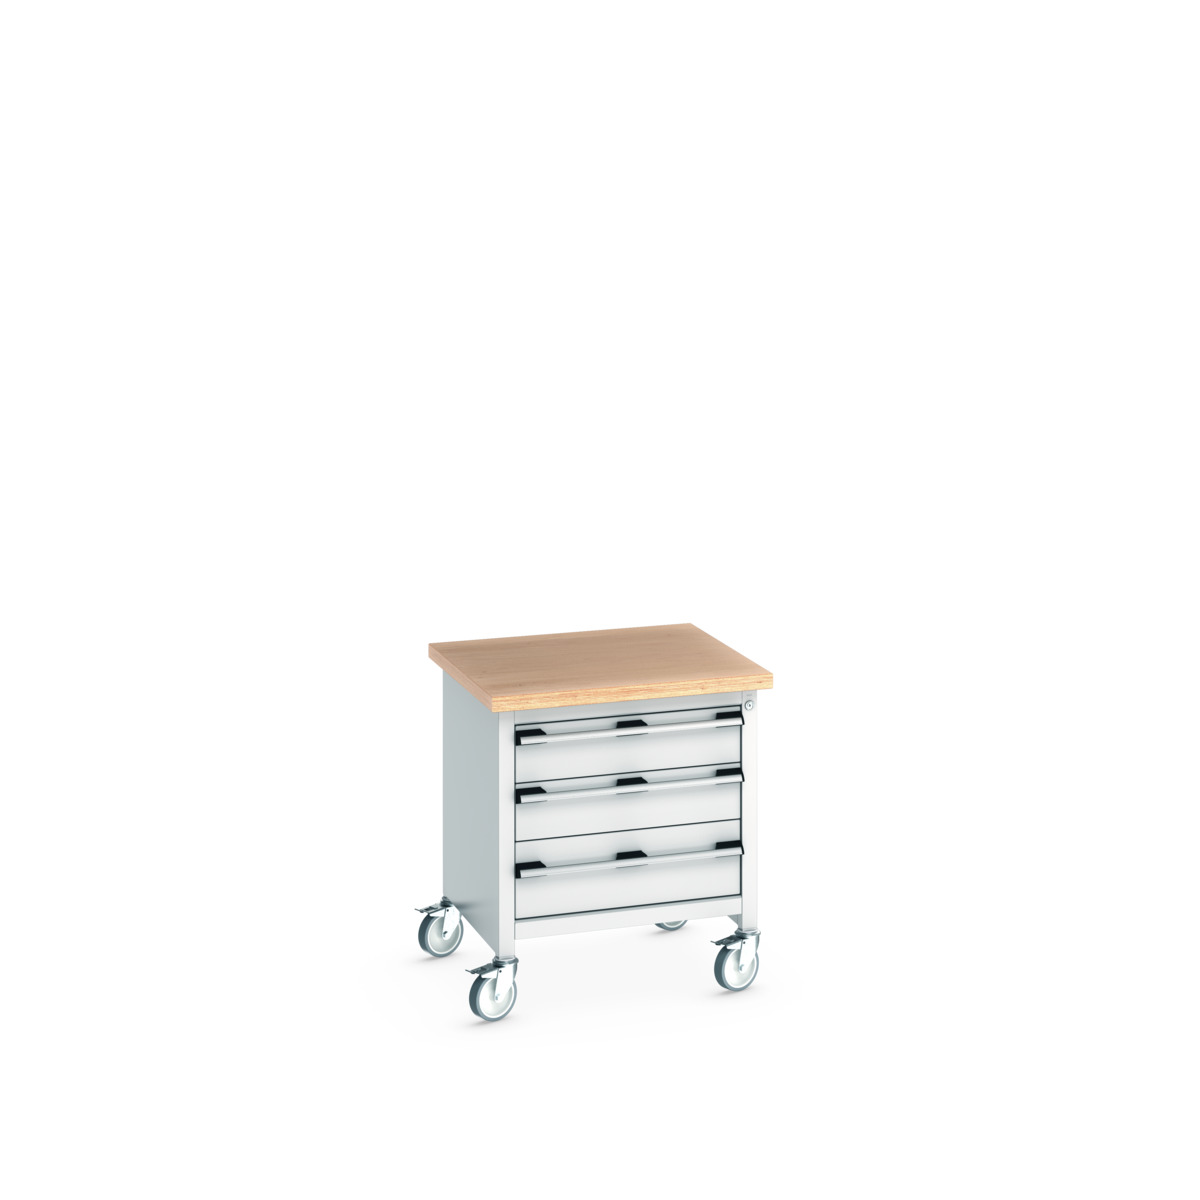 41002091.16V - cubio mobile storage bench (mpx)